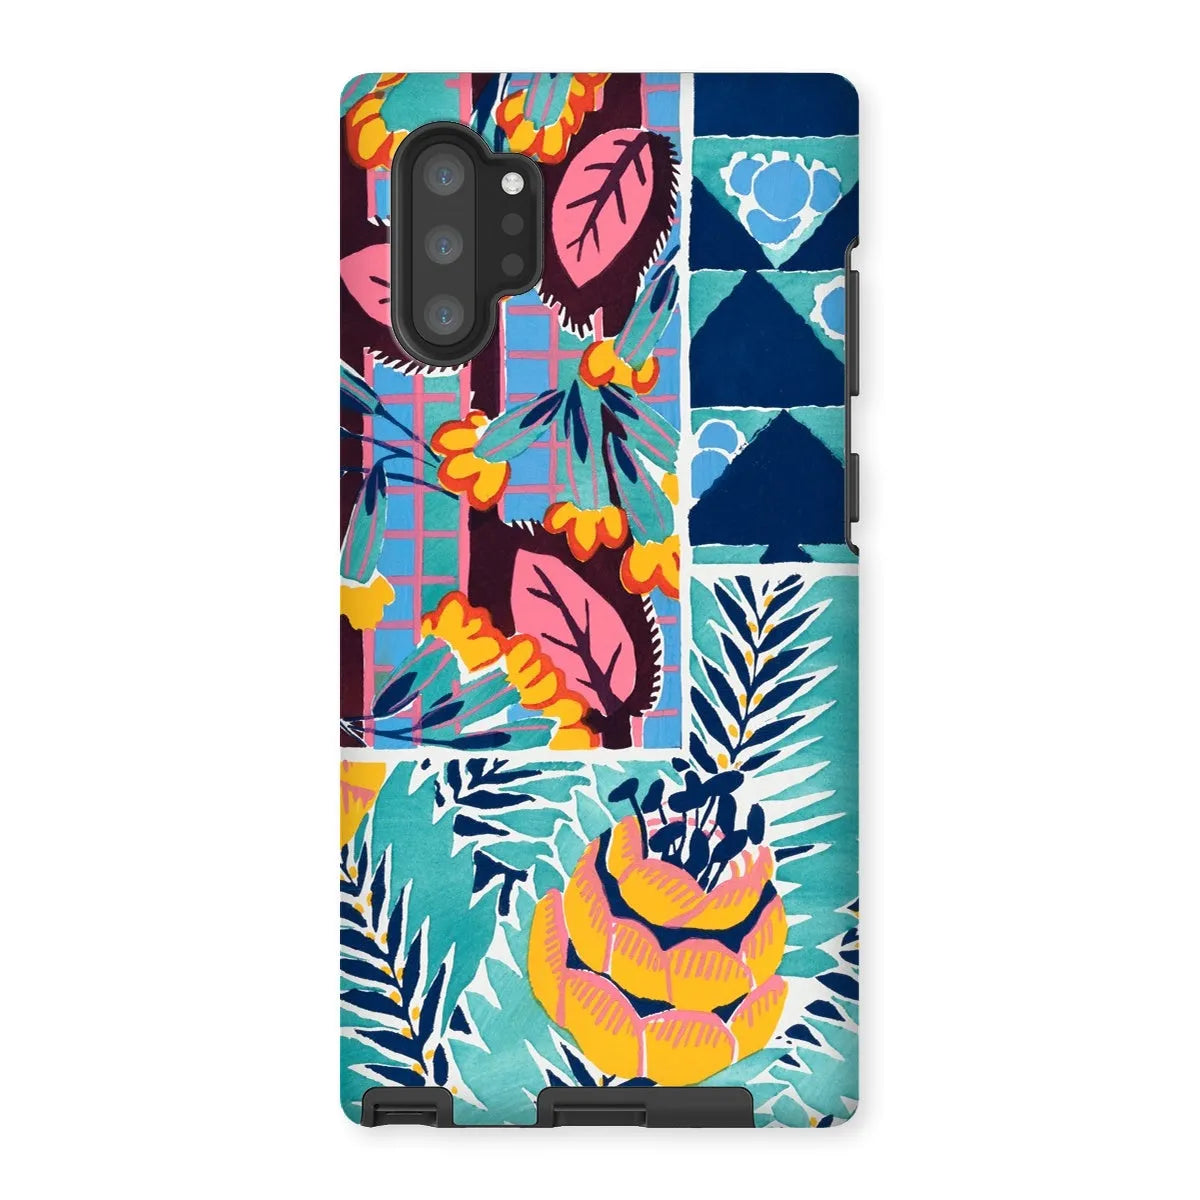 Fabric & Rugs - Pochoir Patterns Phone Case - E. A. Séguy - Samsung Galaxy Note 10p / Matte - Mobile Phone Cases